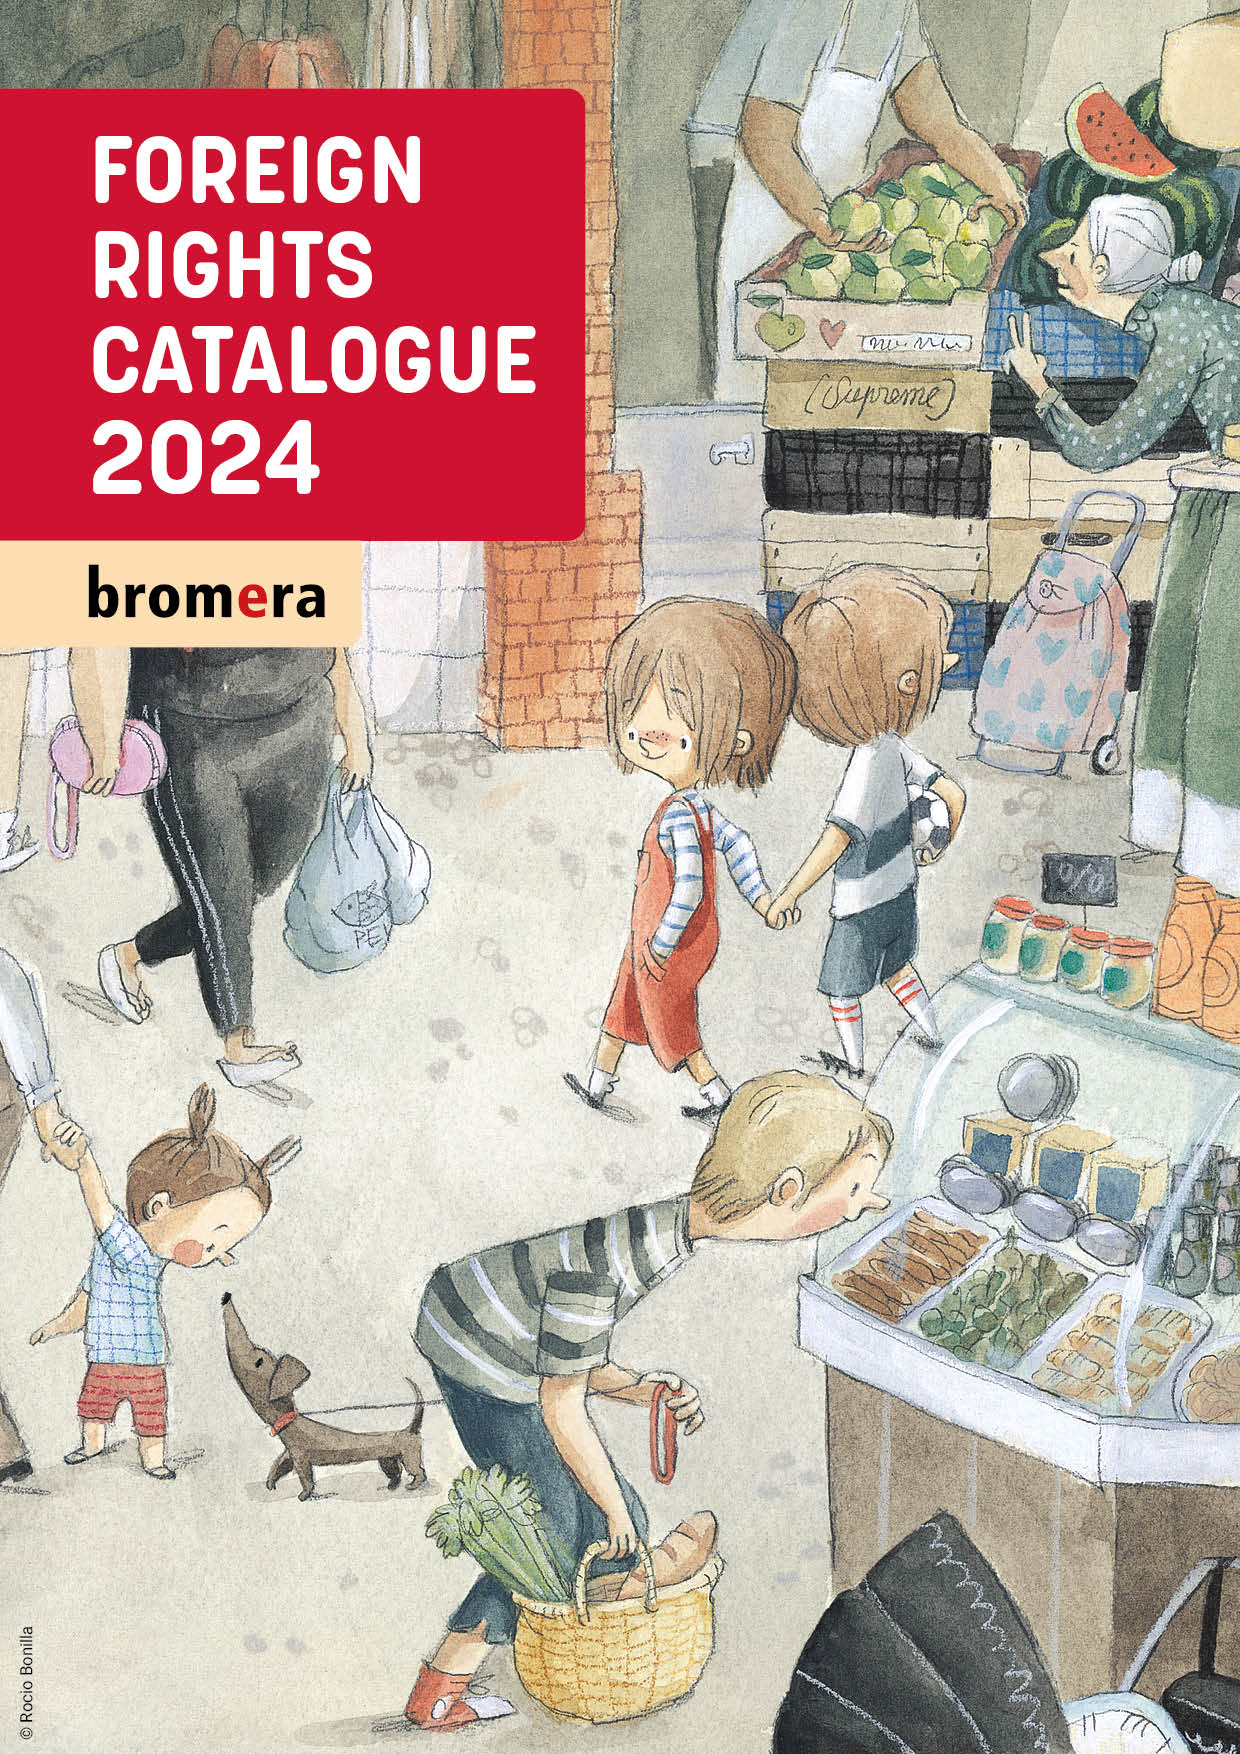 Foreign Rights
Catalogue 2024